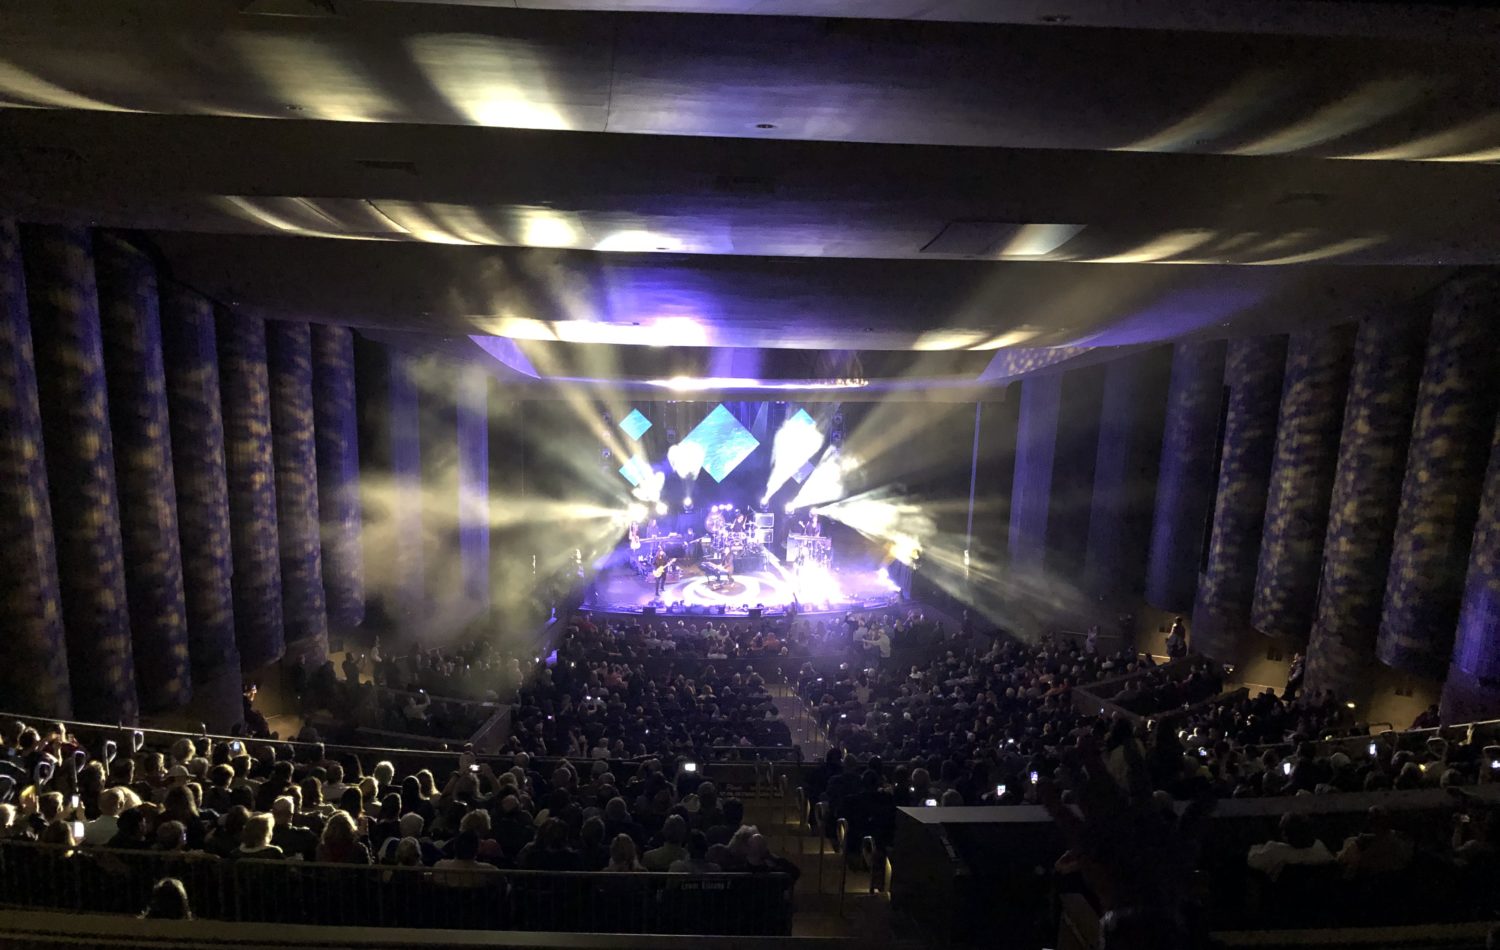 The Goo Goo Dolls perform on stage at the Mark C. Smith Concert hall. There is bright light coming from the stage and curtains on each side of the venue. There are people in the dark audience.